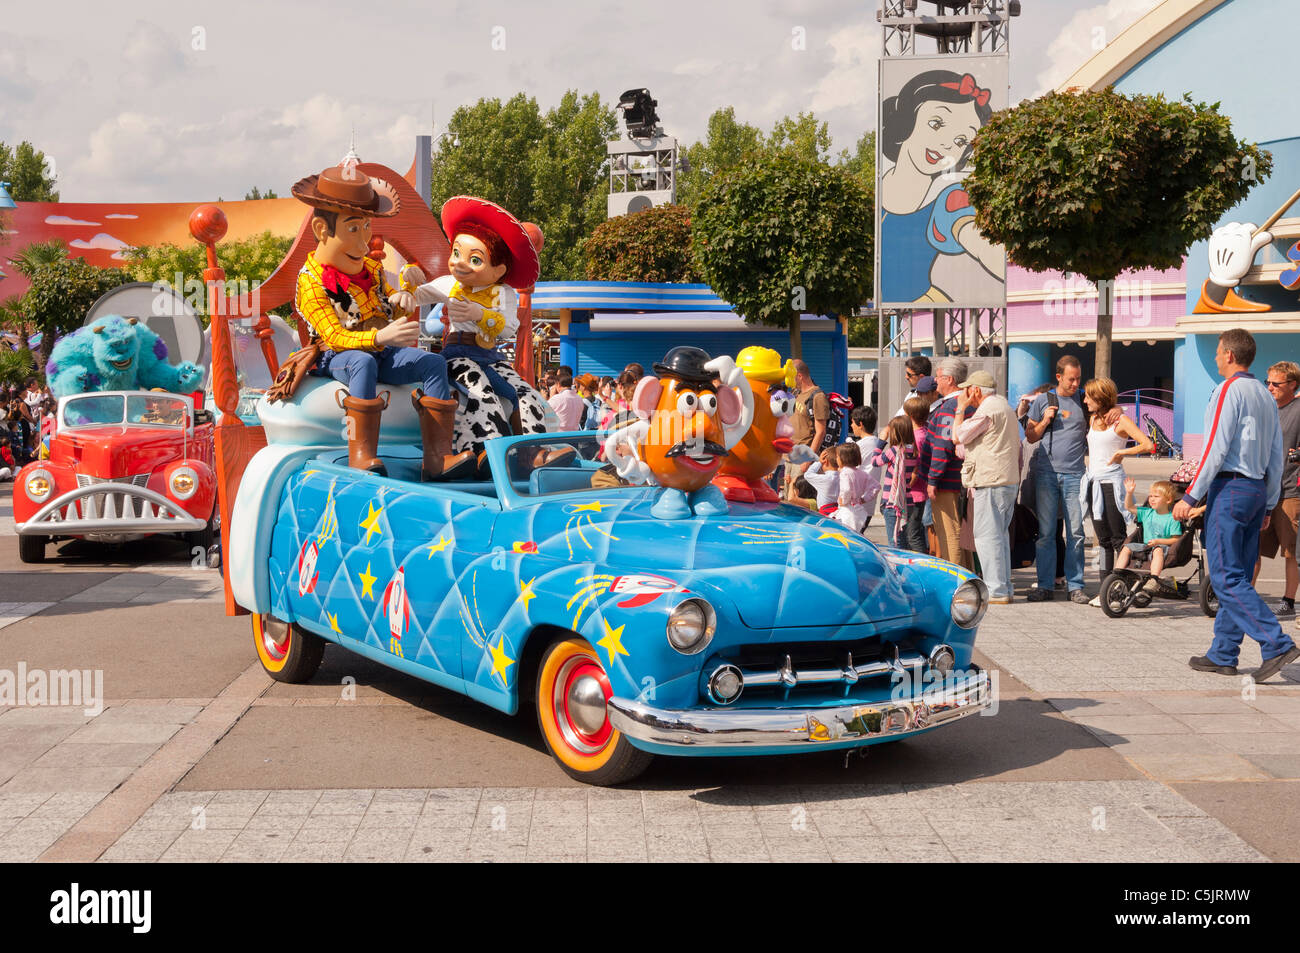 The Stars 'n' Cars parade with the Toy story characters at Disneyland Paris in France Stock Photo